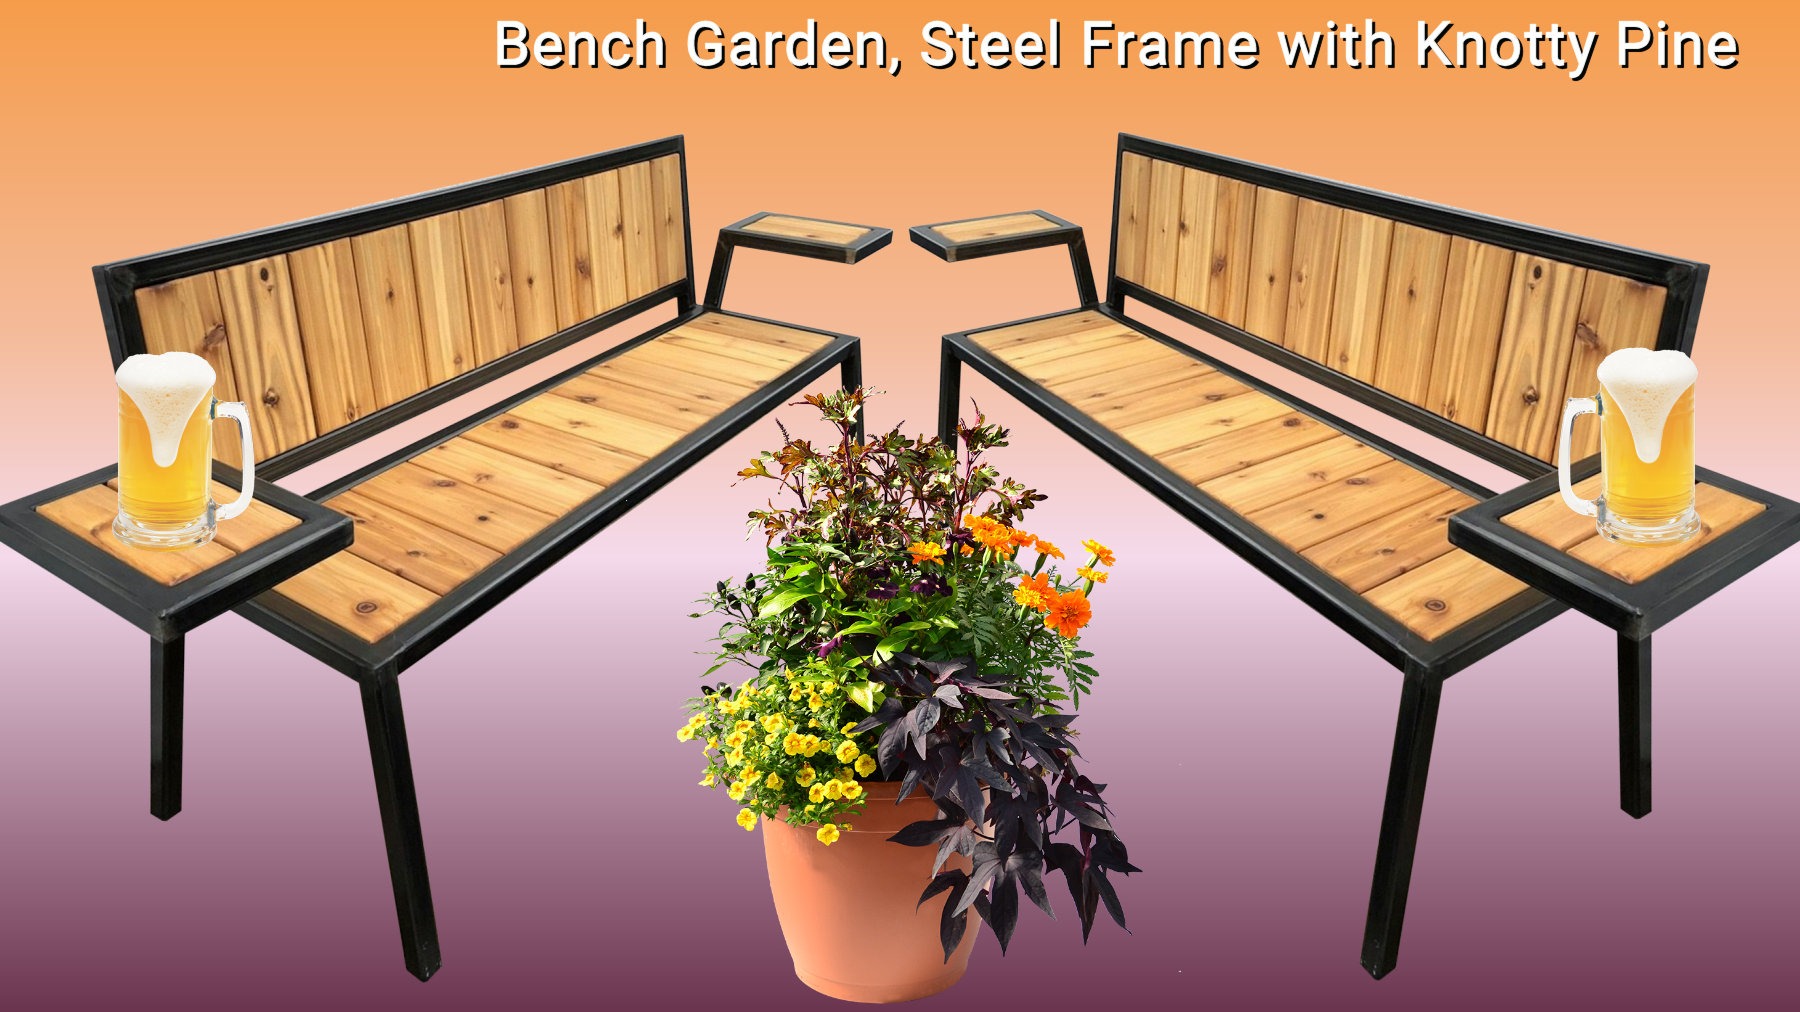 Bench Garden, Steel Frame with Knotty Pine